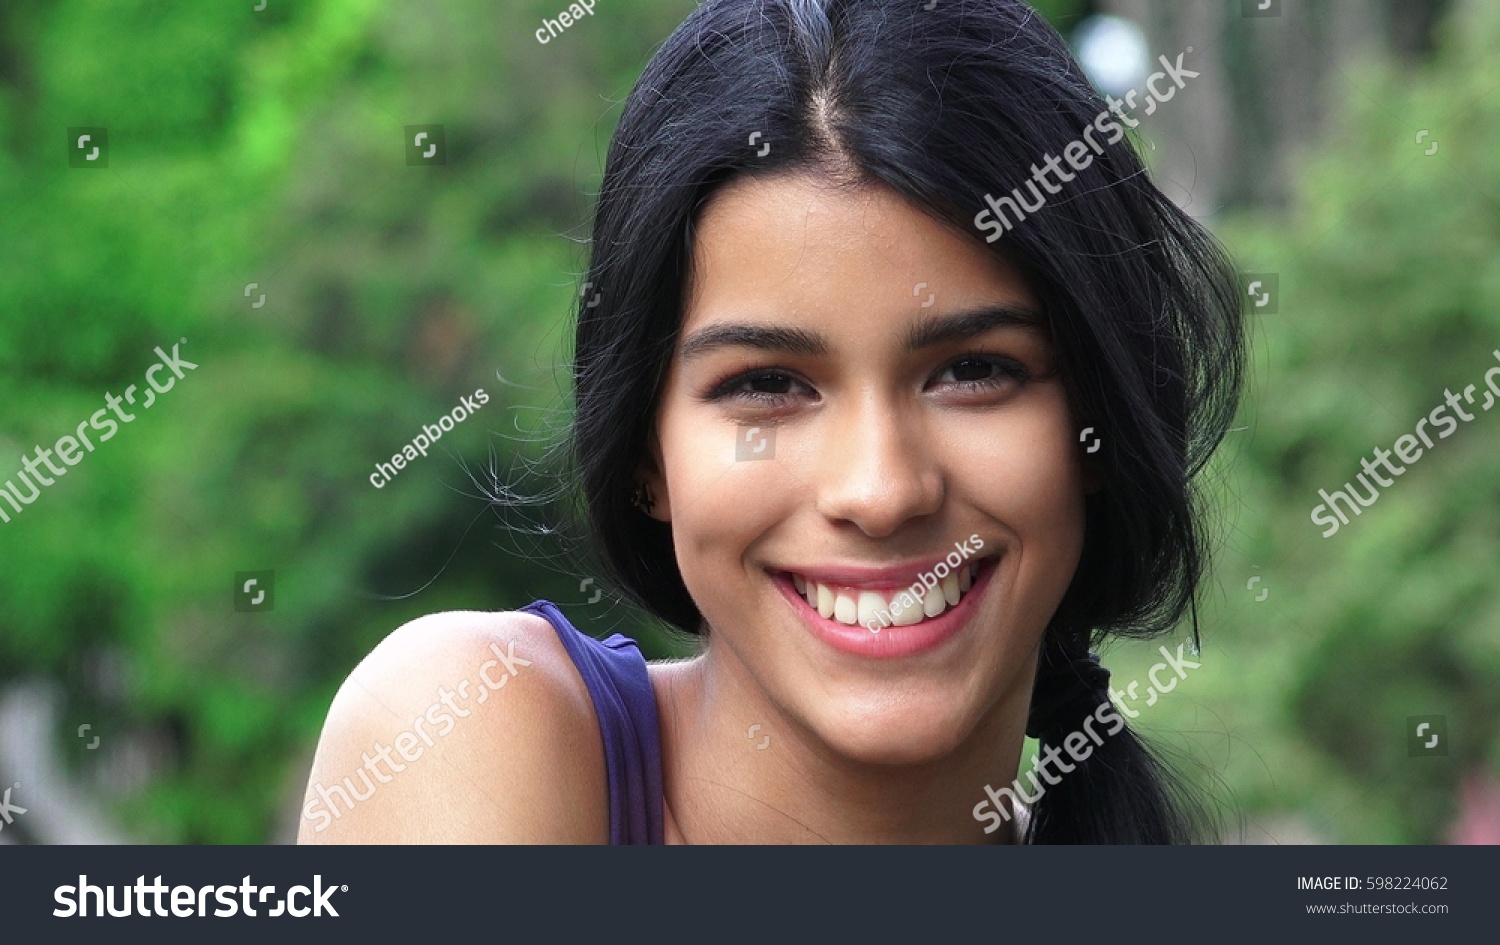 Person Smiling And Happy #598224062